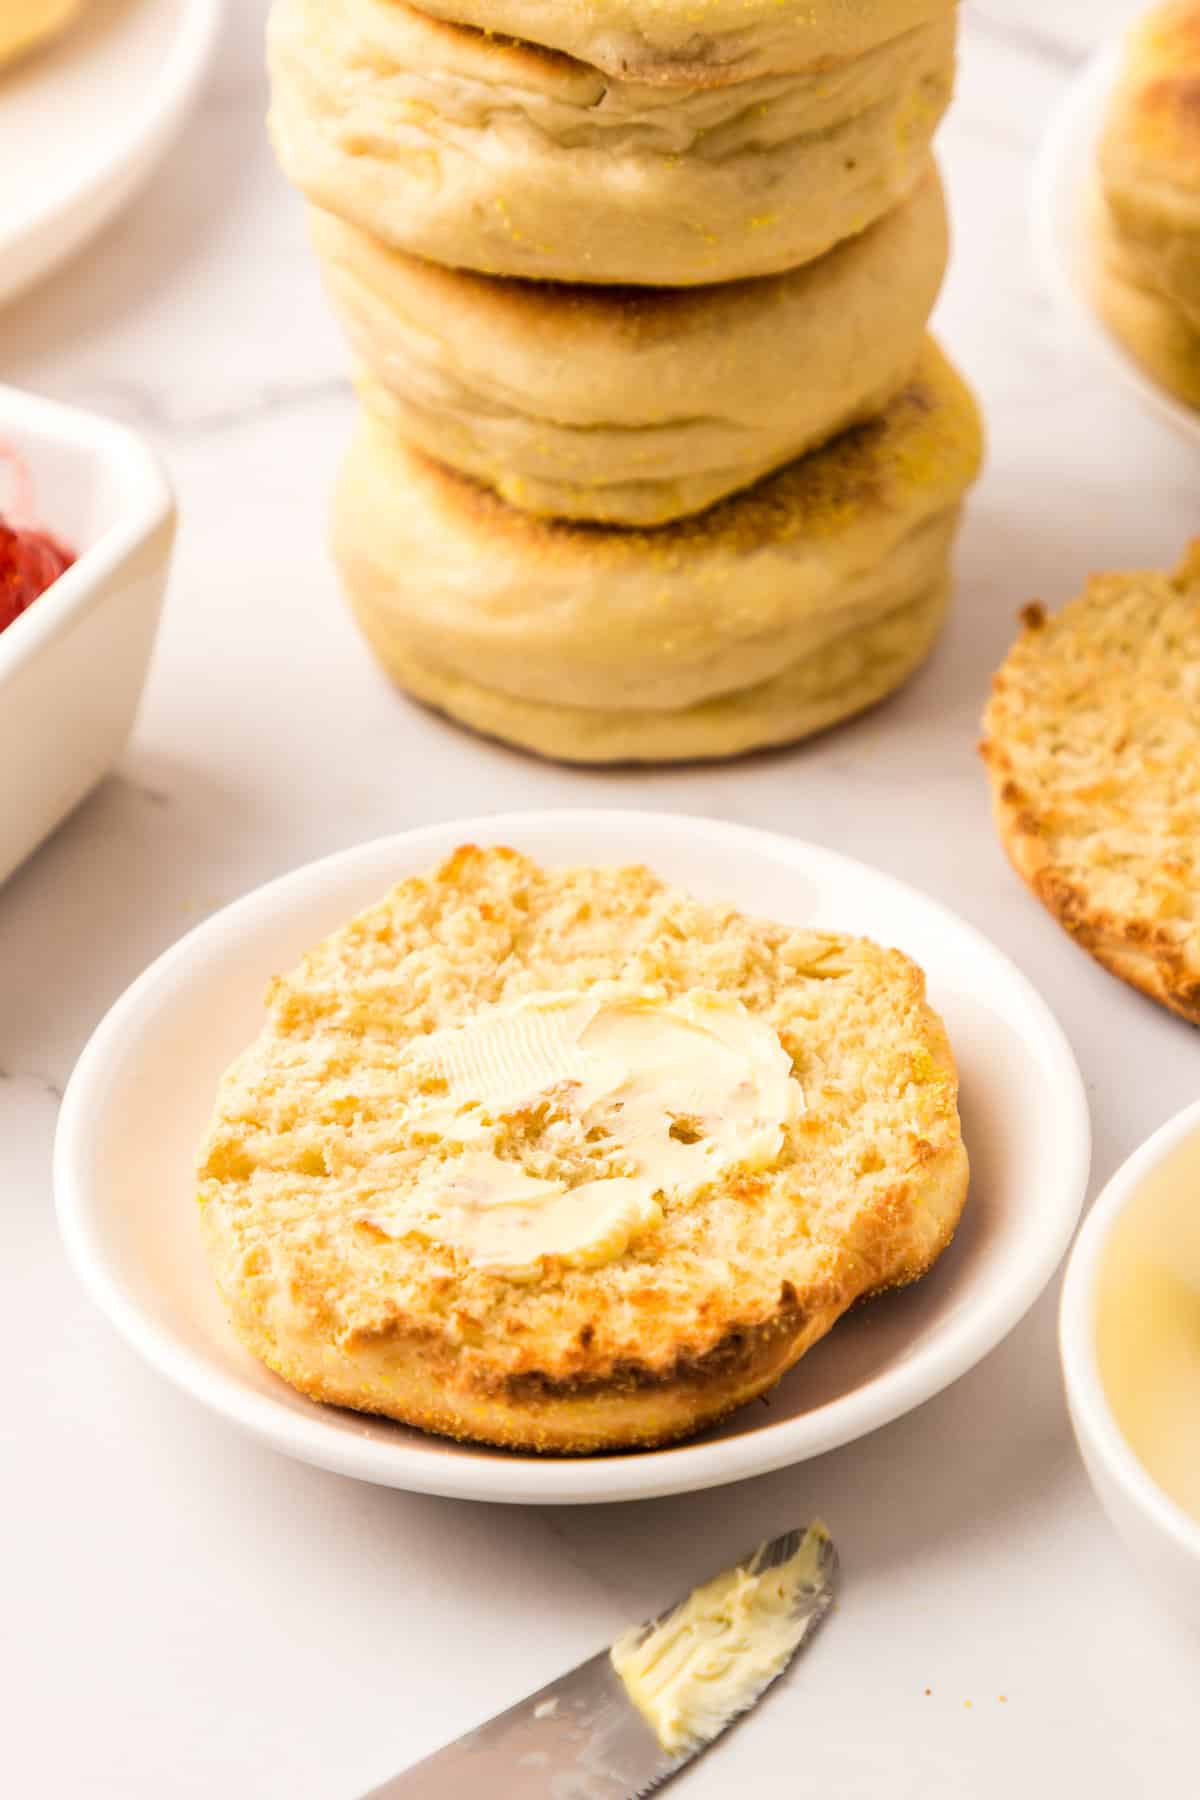 Smearing Butter on Fresh Homemade English Muffins